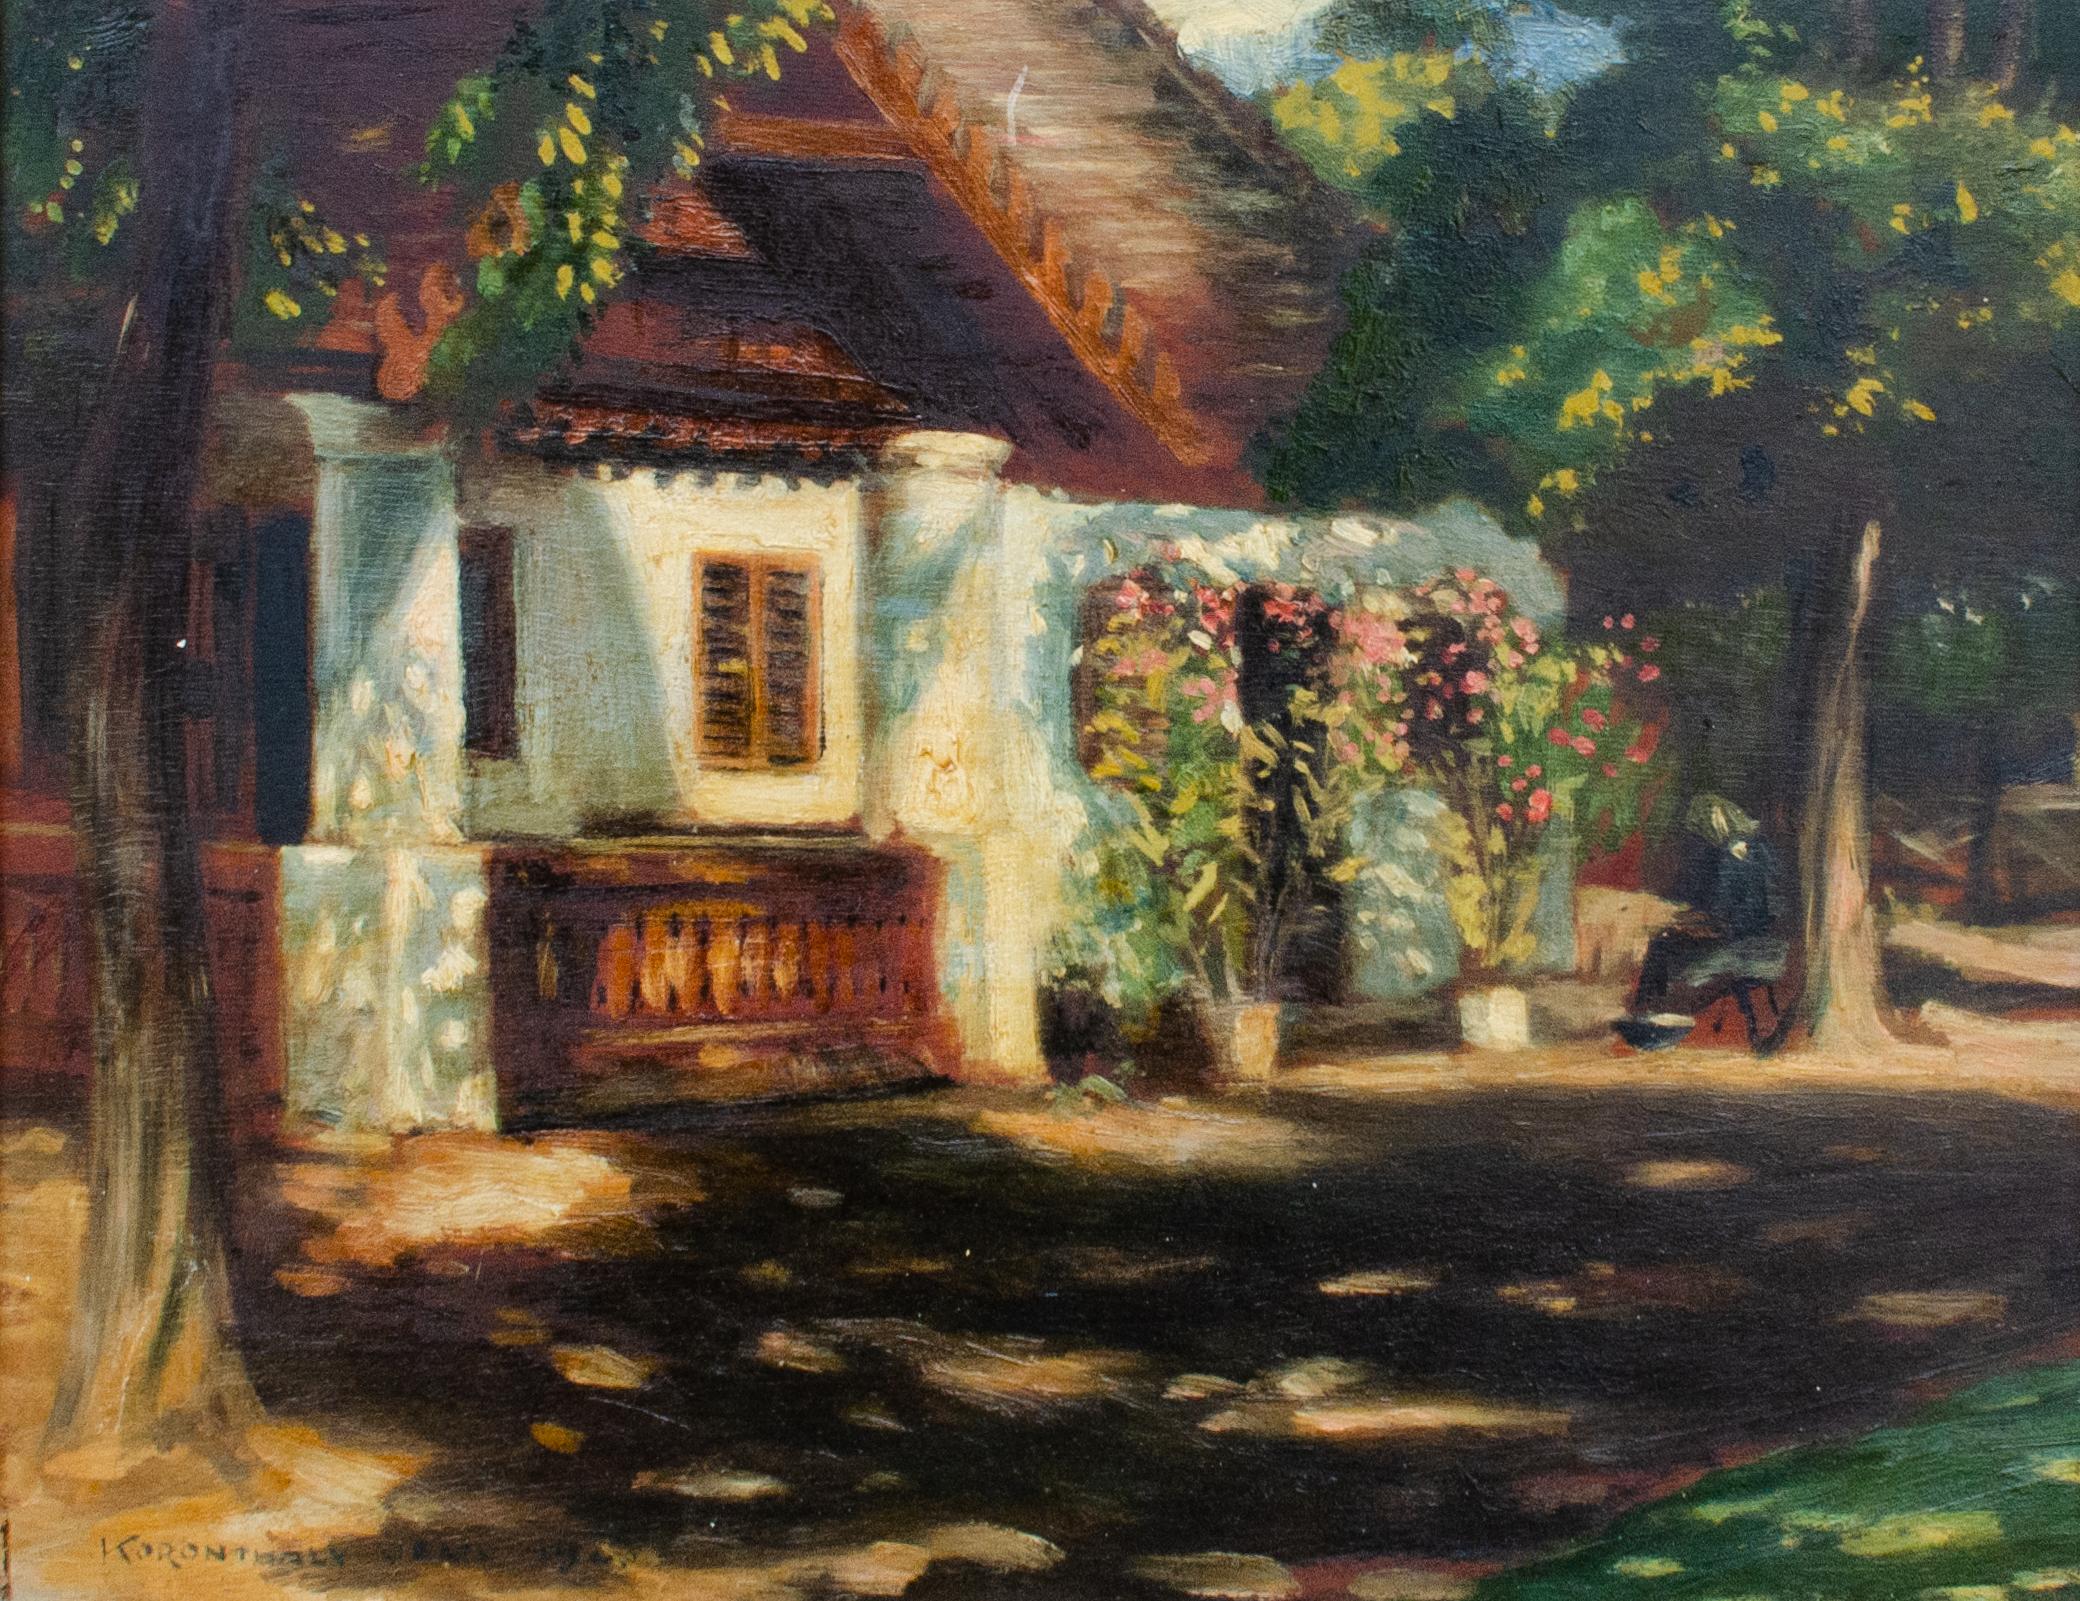 1923 Cottage Painting by Hungarian Artist Koronthály Jenő For Sale 1